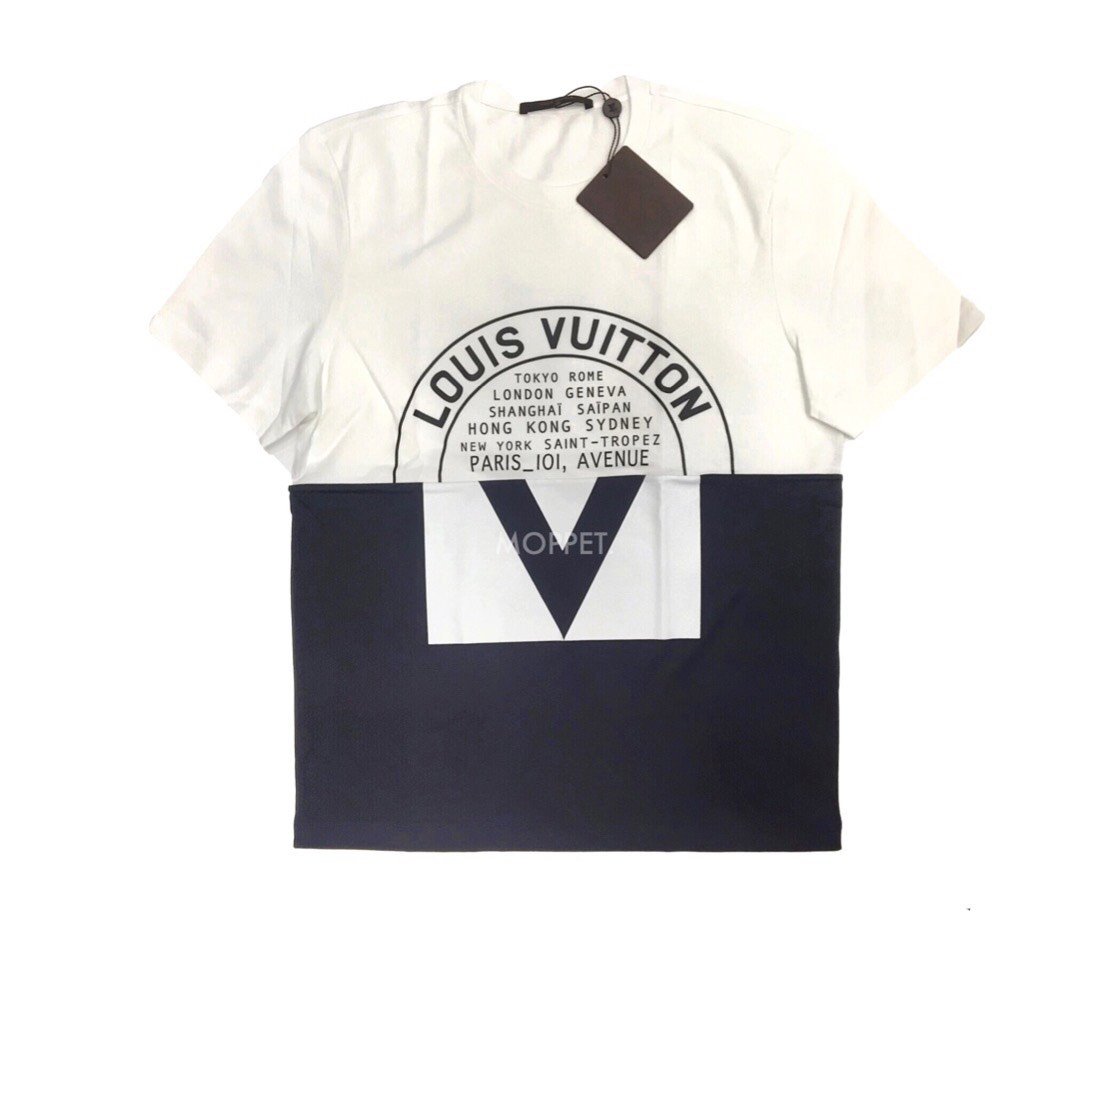 New LV Printed T-Shirt Size M" in Black/White Cotton 